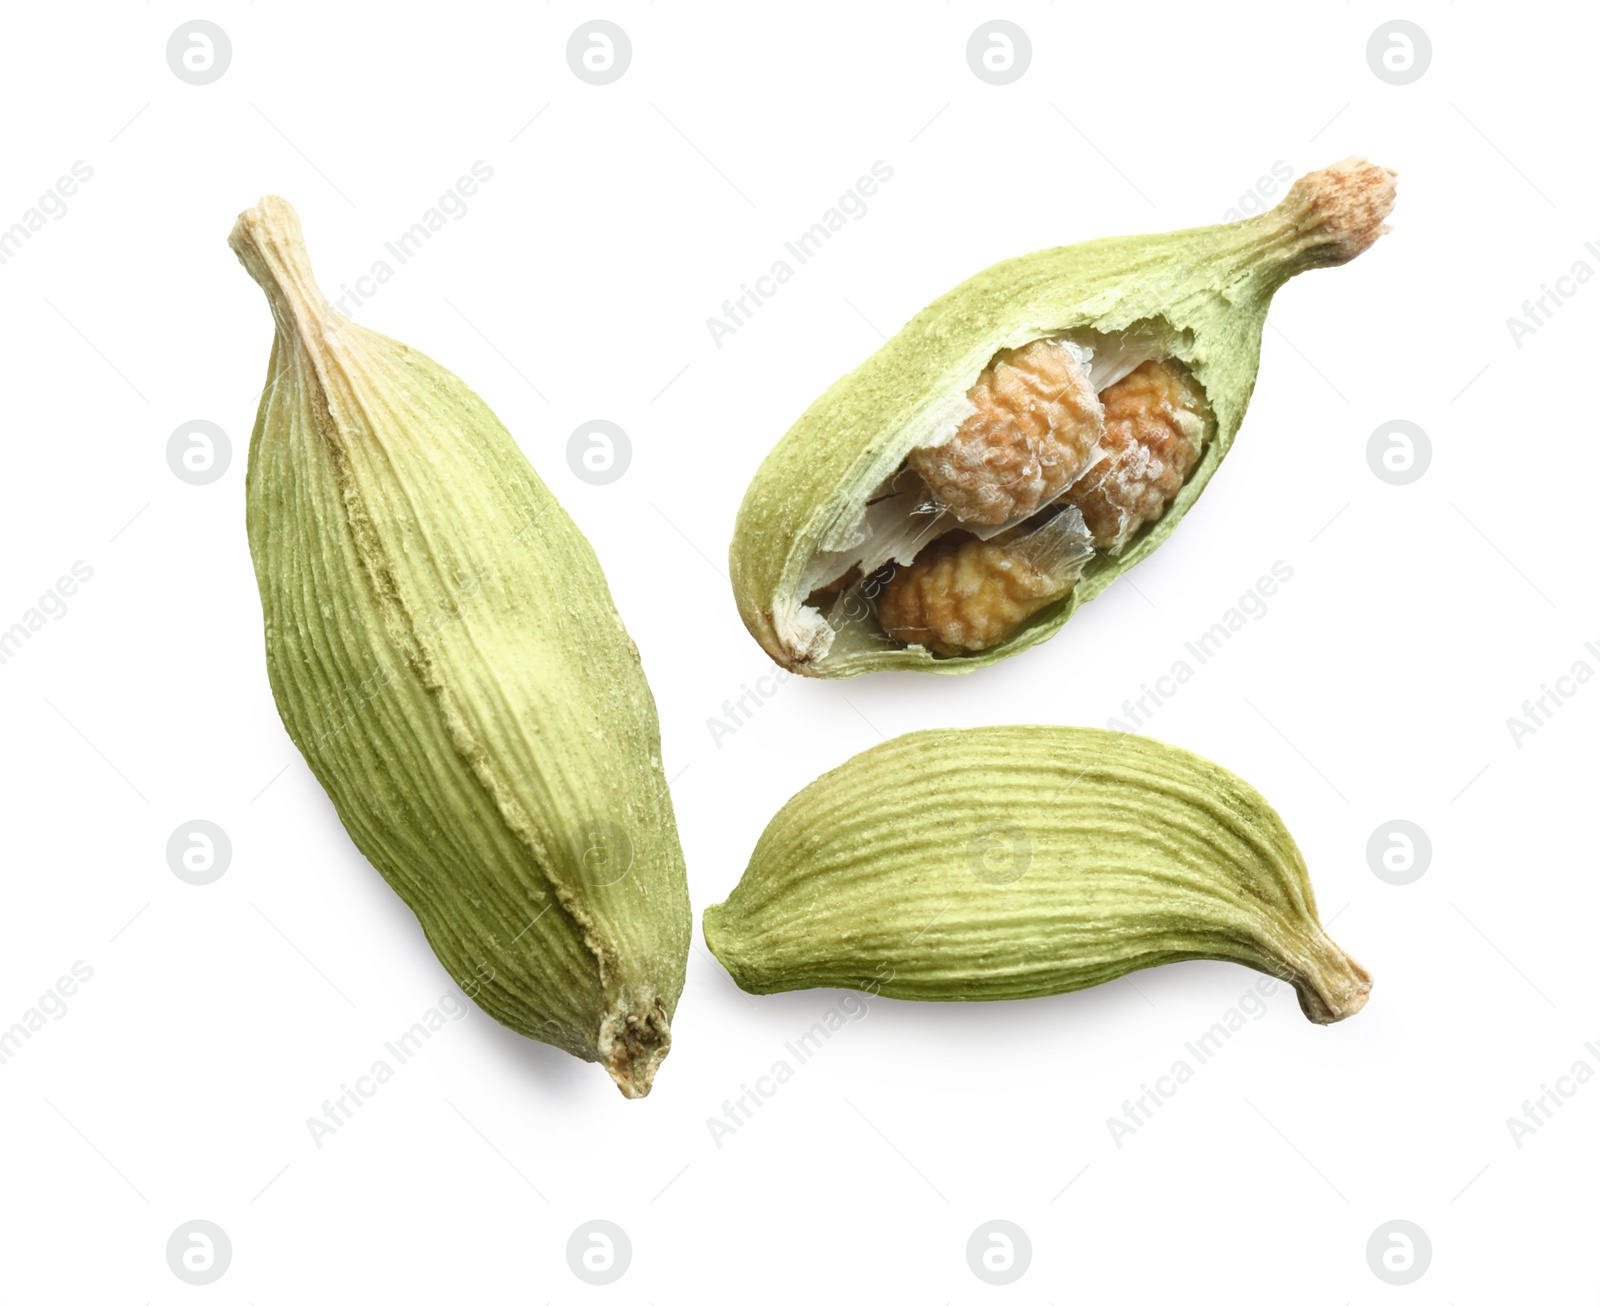 Photo of Dry green cardamom pods on white background, top view